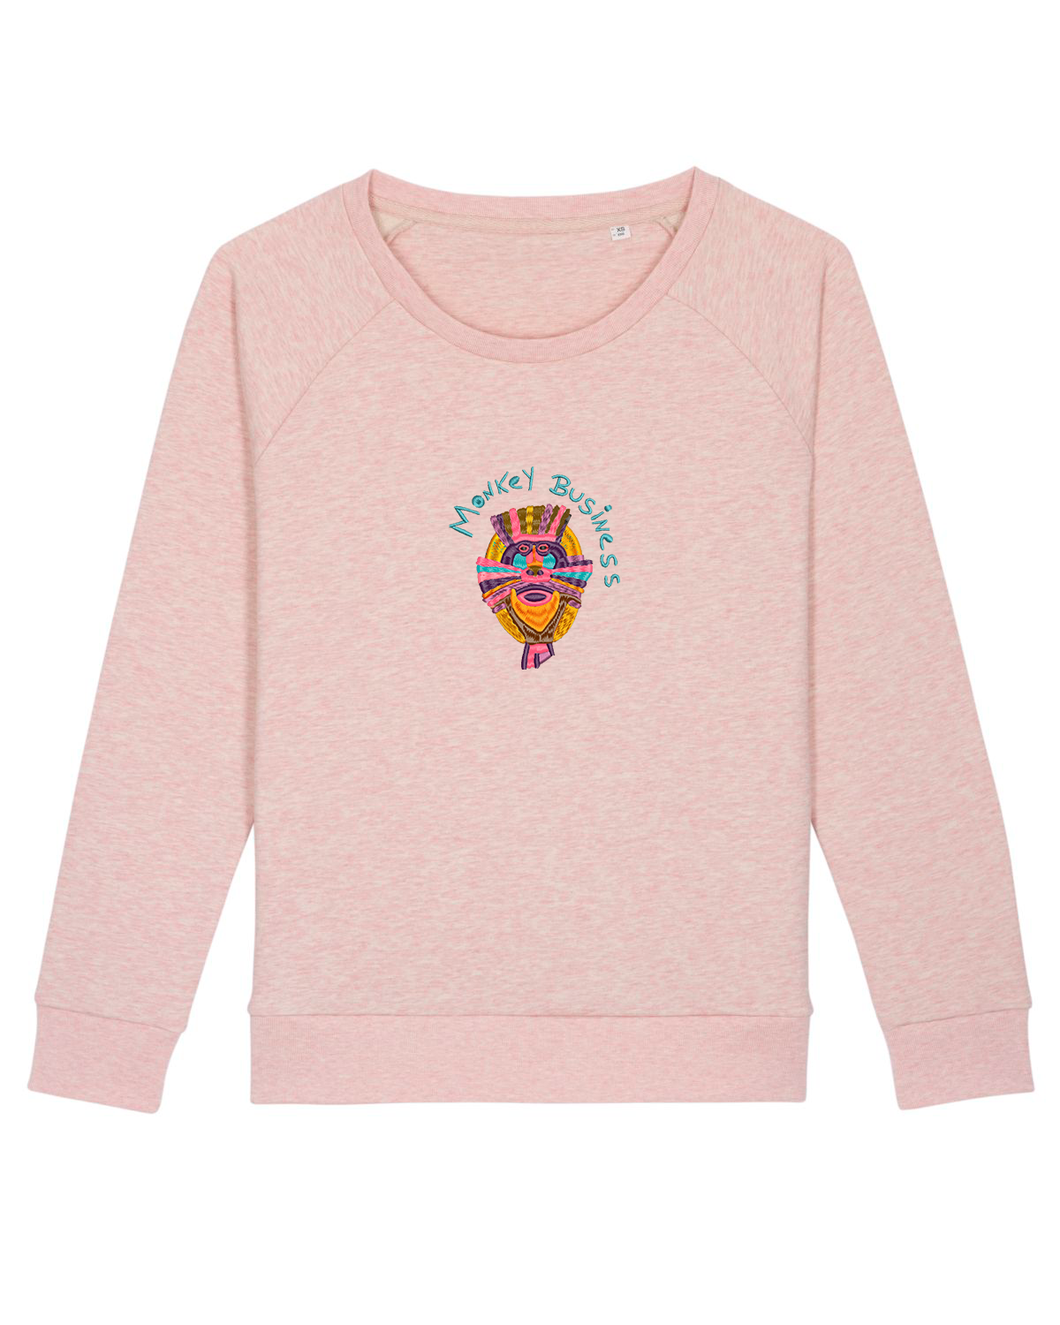 Monkey business 🐵- Embroidered WOMEN'S RELAXED FIT SWEATSHIRT